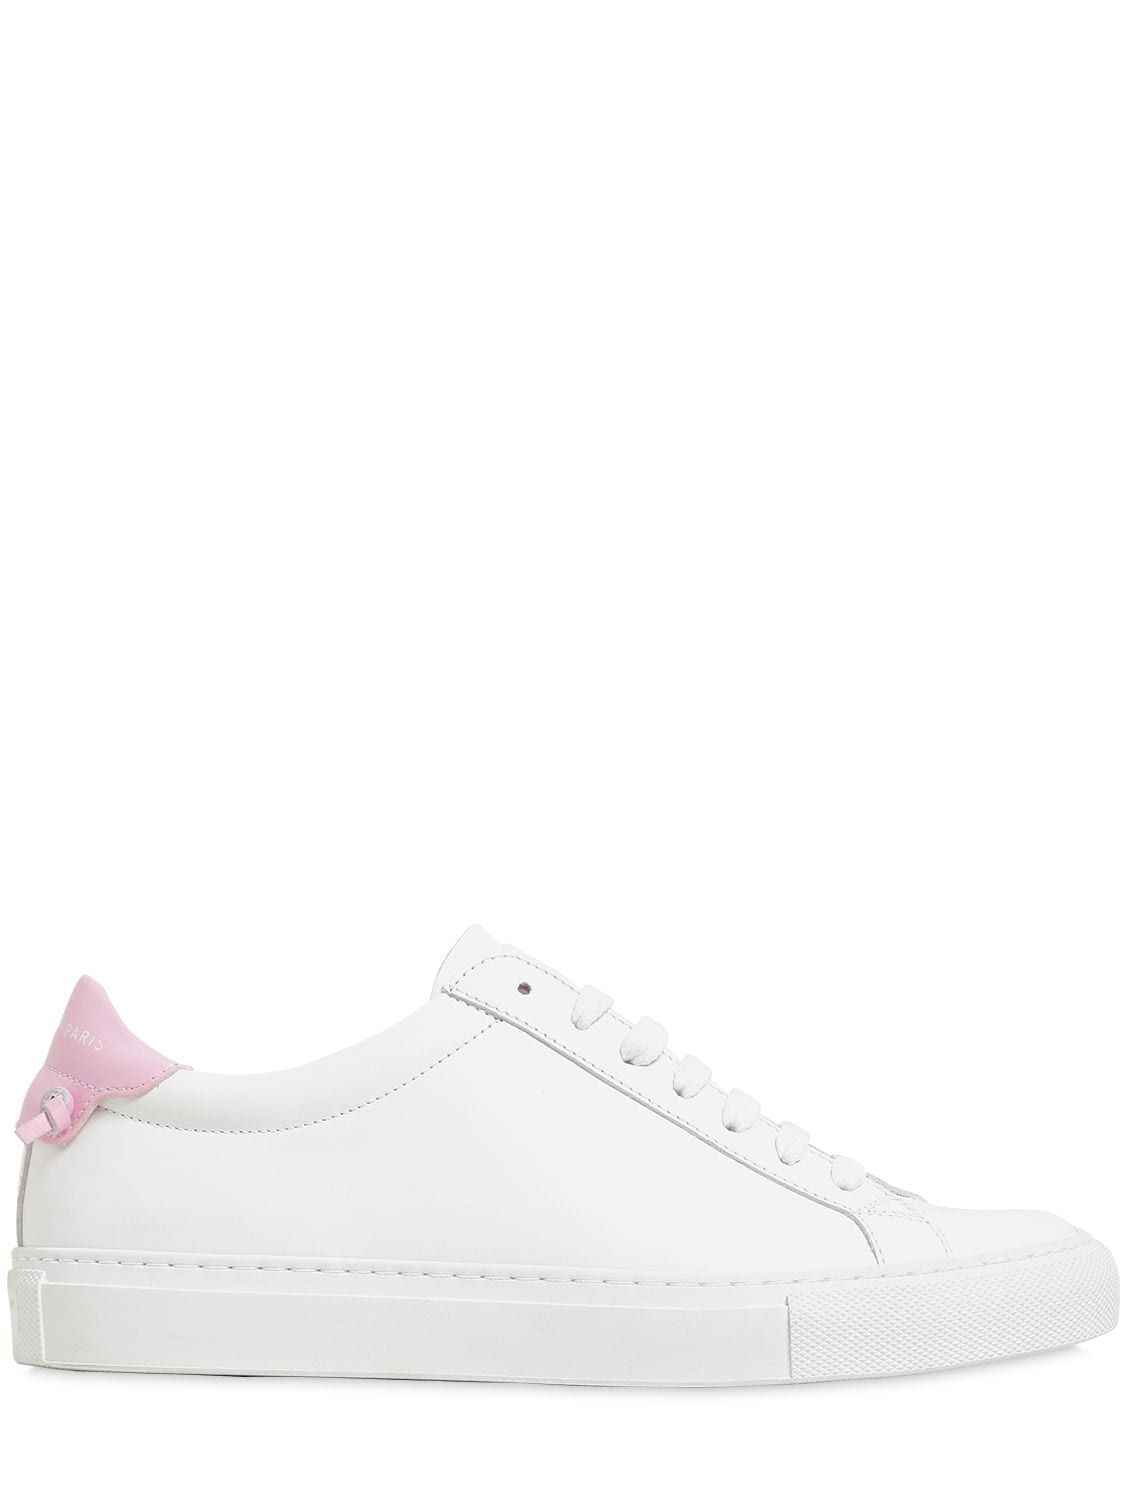 GIVENCHY 20MM URBAN KNOT LEATHER SNEAKER,67IA8M002-MTQ50